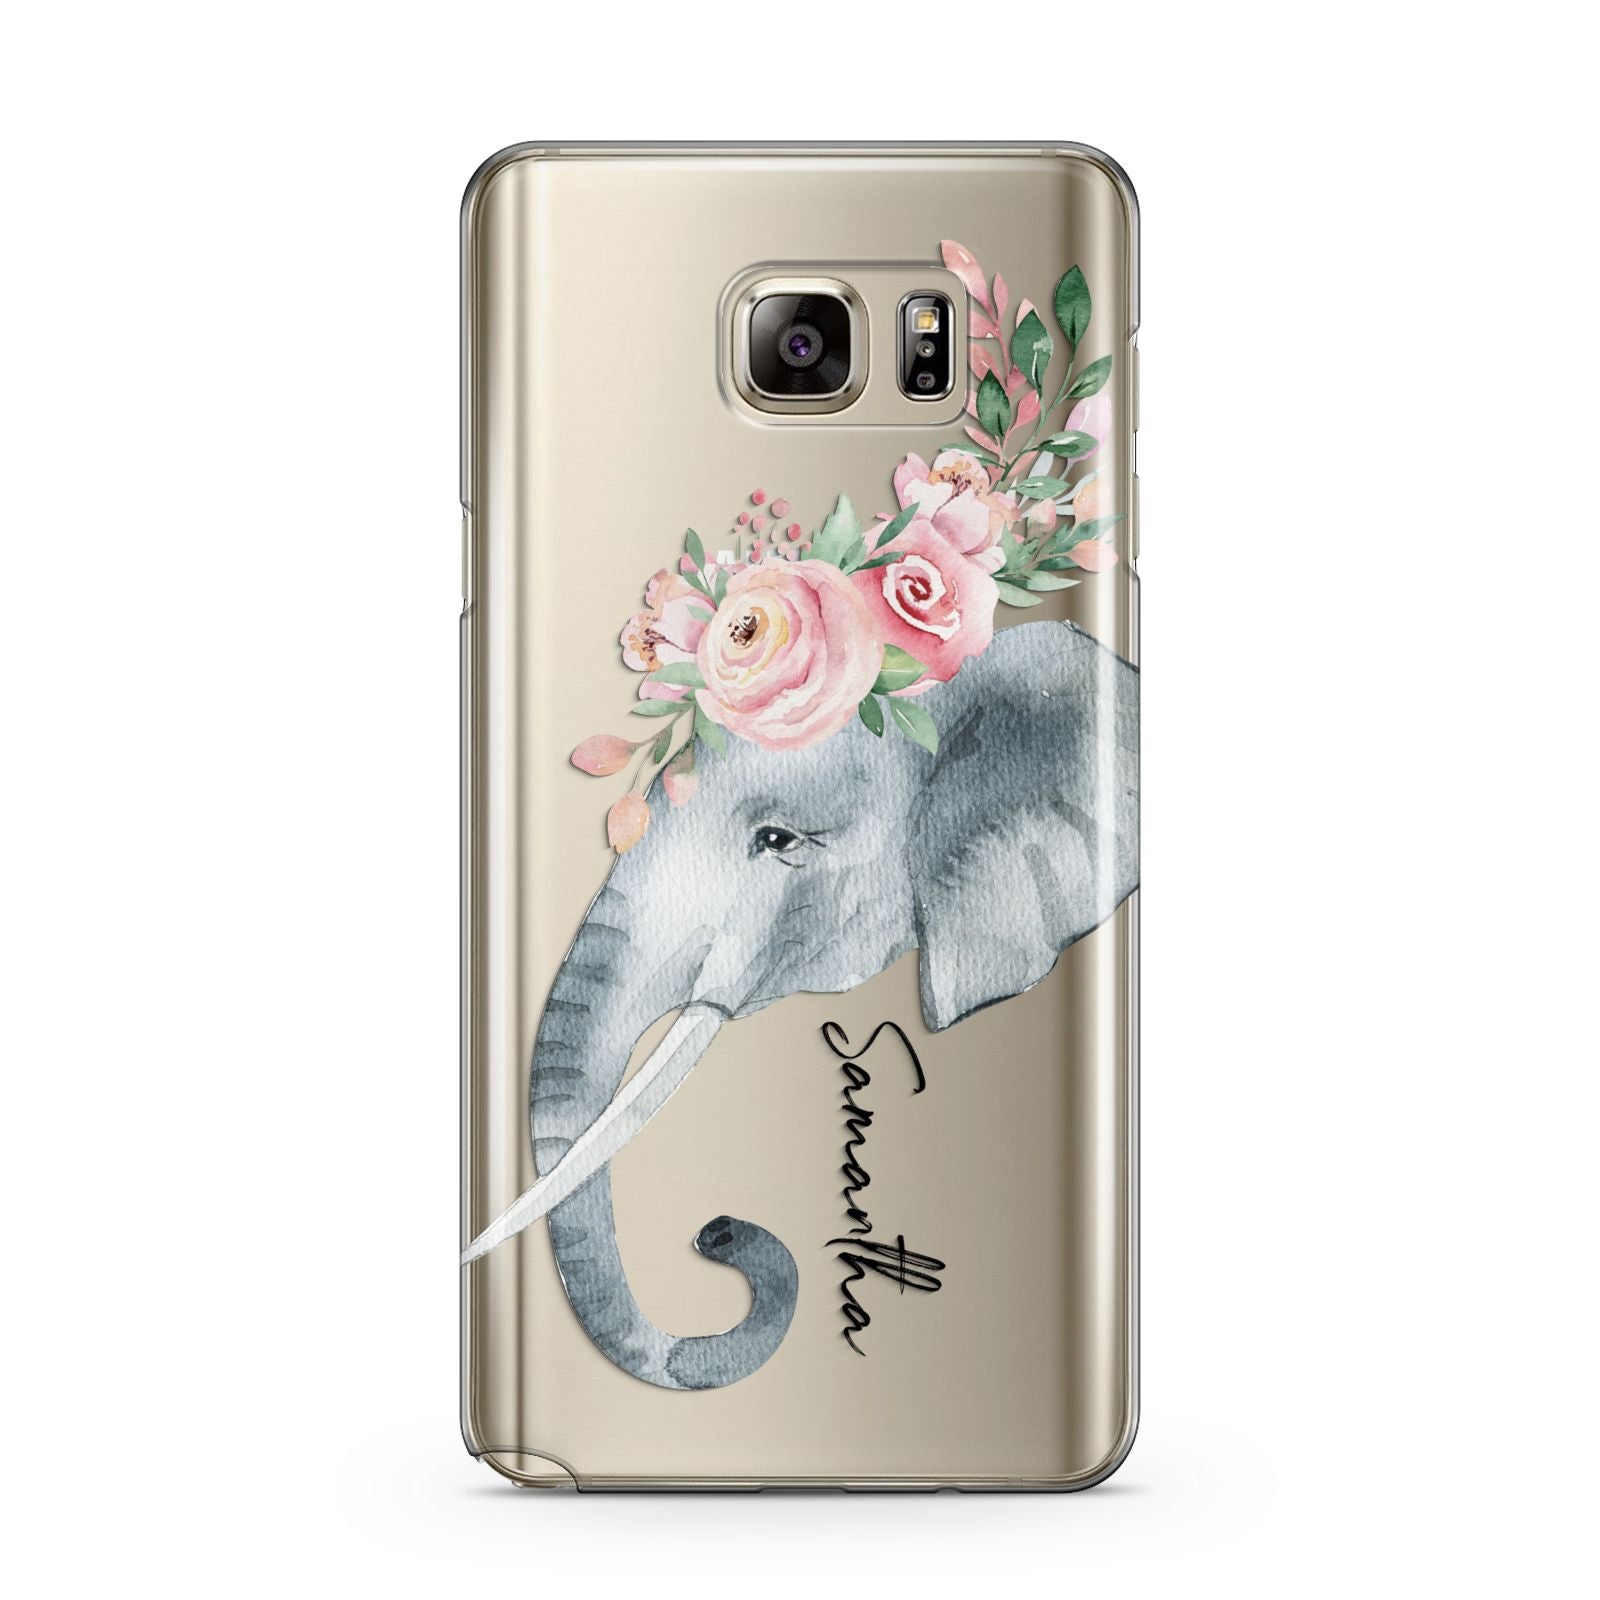 Personalised Elephant Samsung Galaxy Note 5 Case